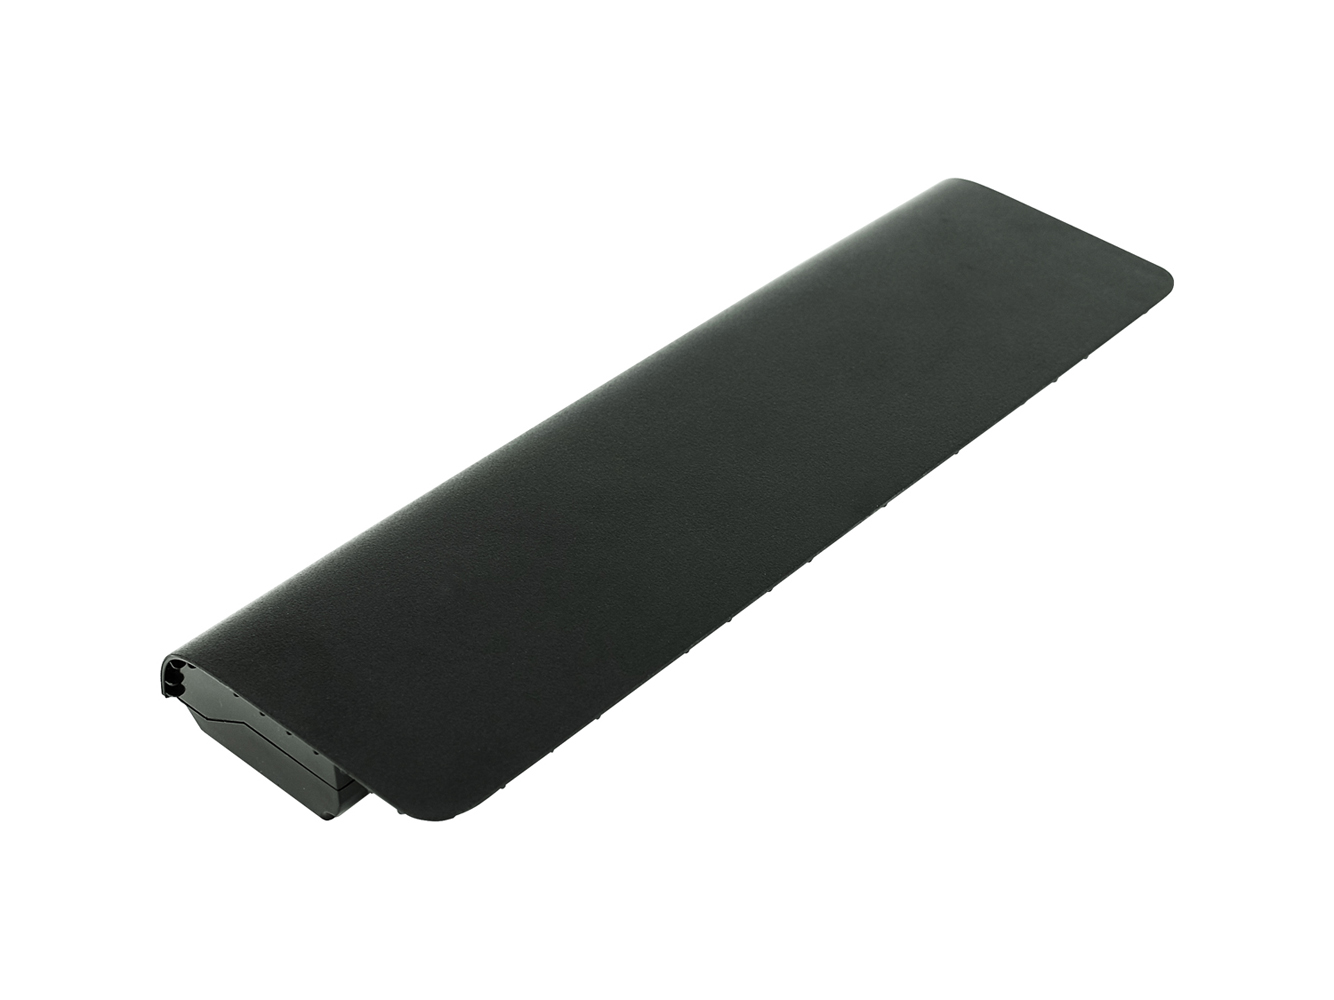 0B110-00300000, 0B110-00300000M replacement Laptop Battery for Asus G551, G551J, 5200mAh, 11.10V